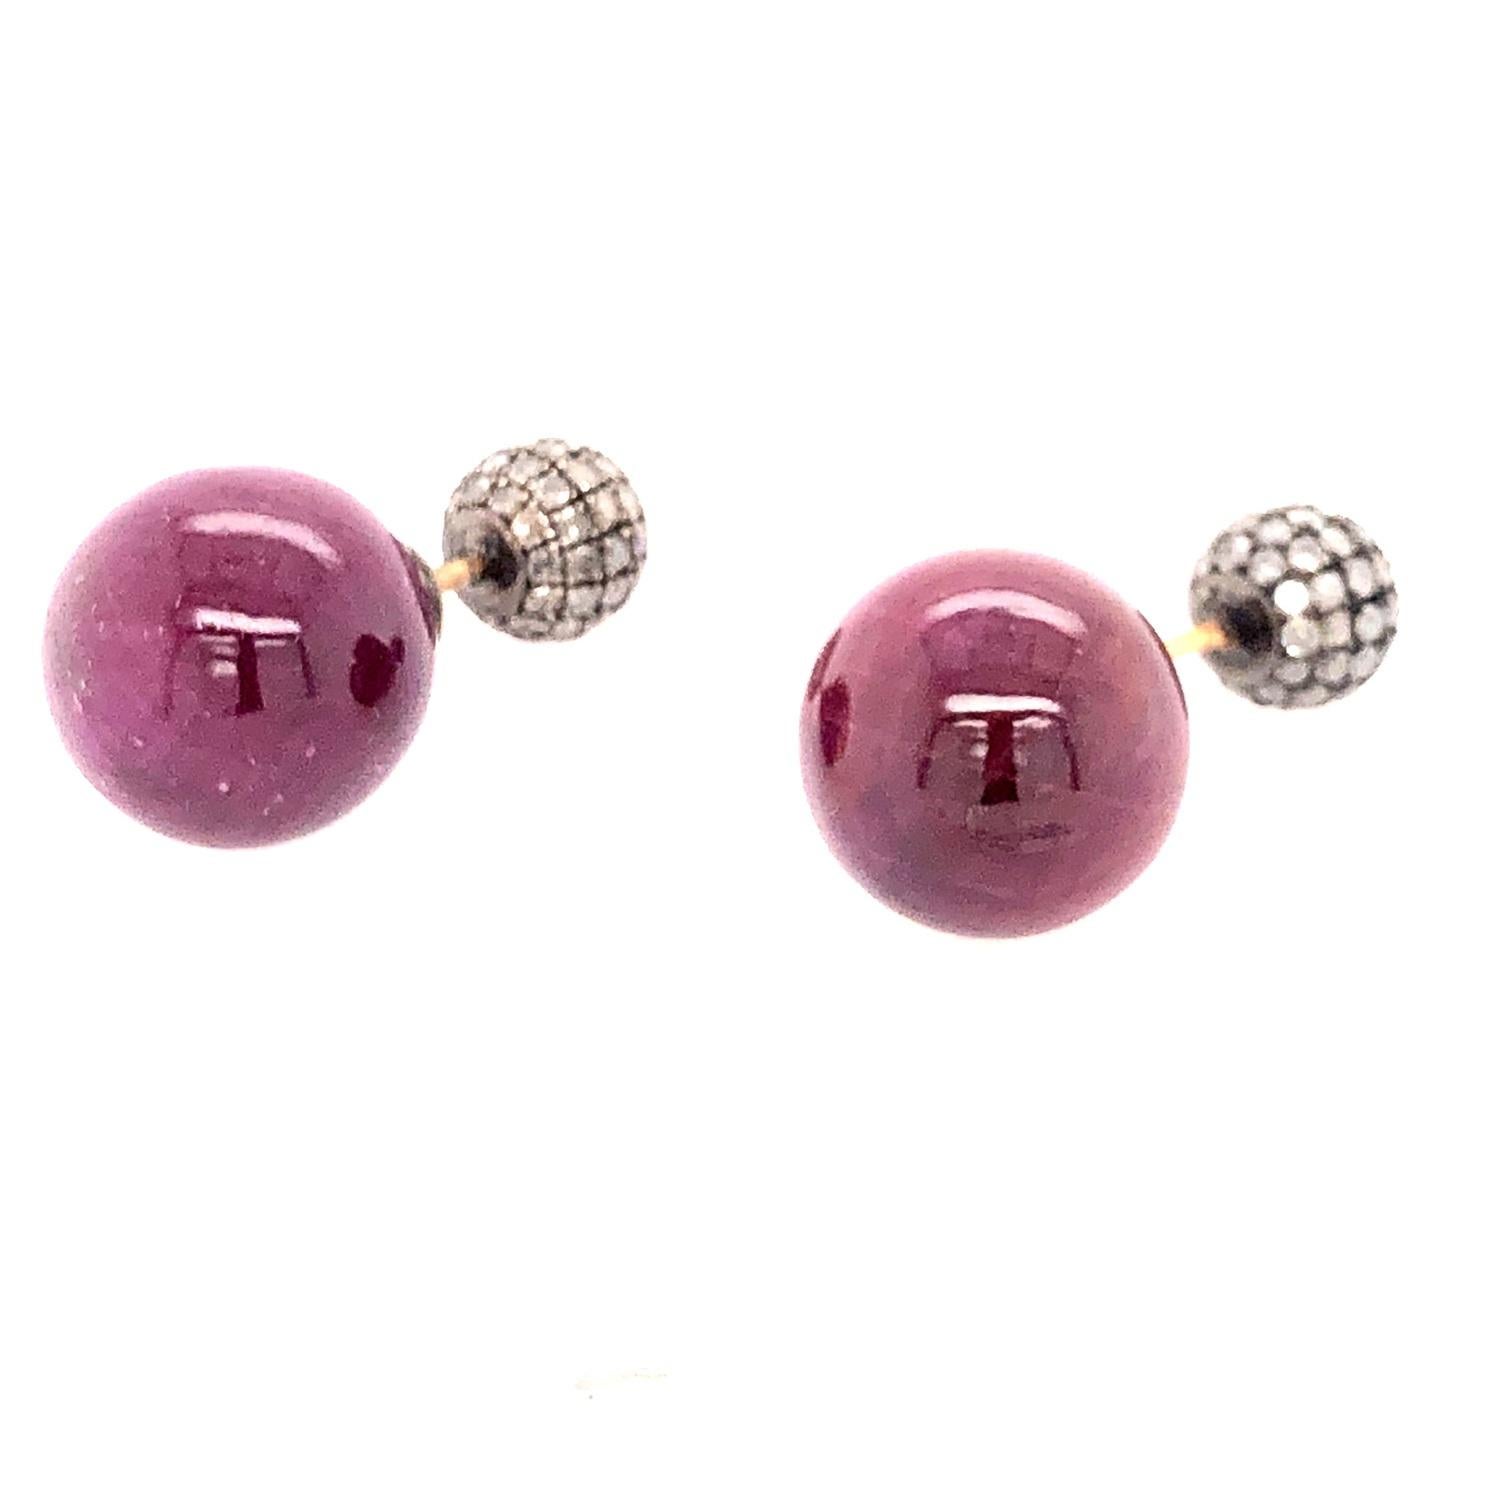 Artisan Ruby & Pave Diamond Ball Tunnel Earrings Made in 14k Gold & Silver For Sale